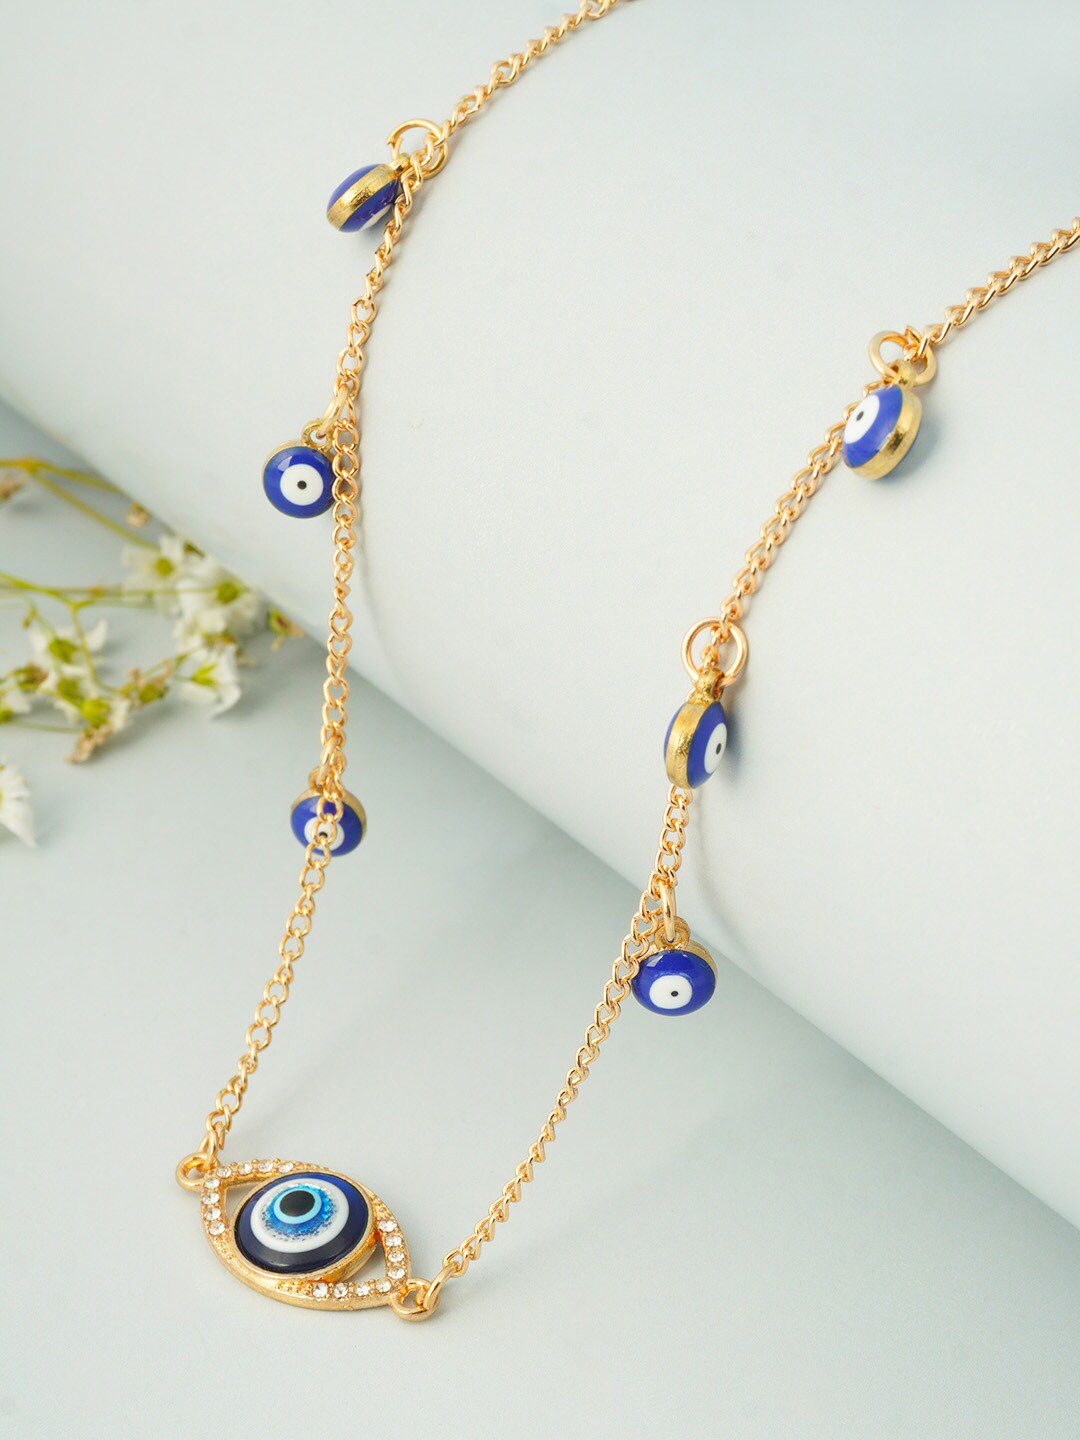 Ferosh Gold-Toned & Blue Evil Eye Charm Beads Necklace Price in India